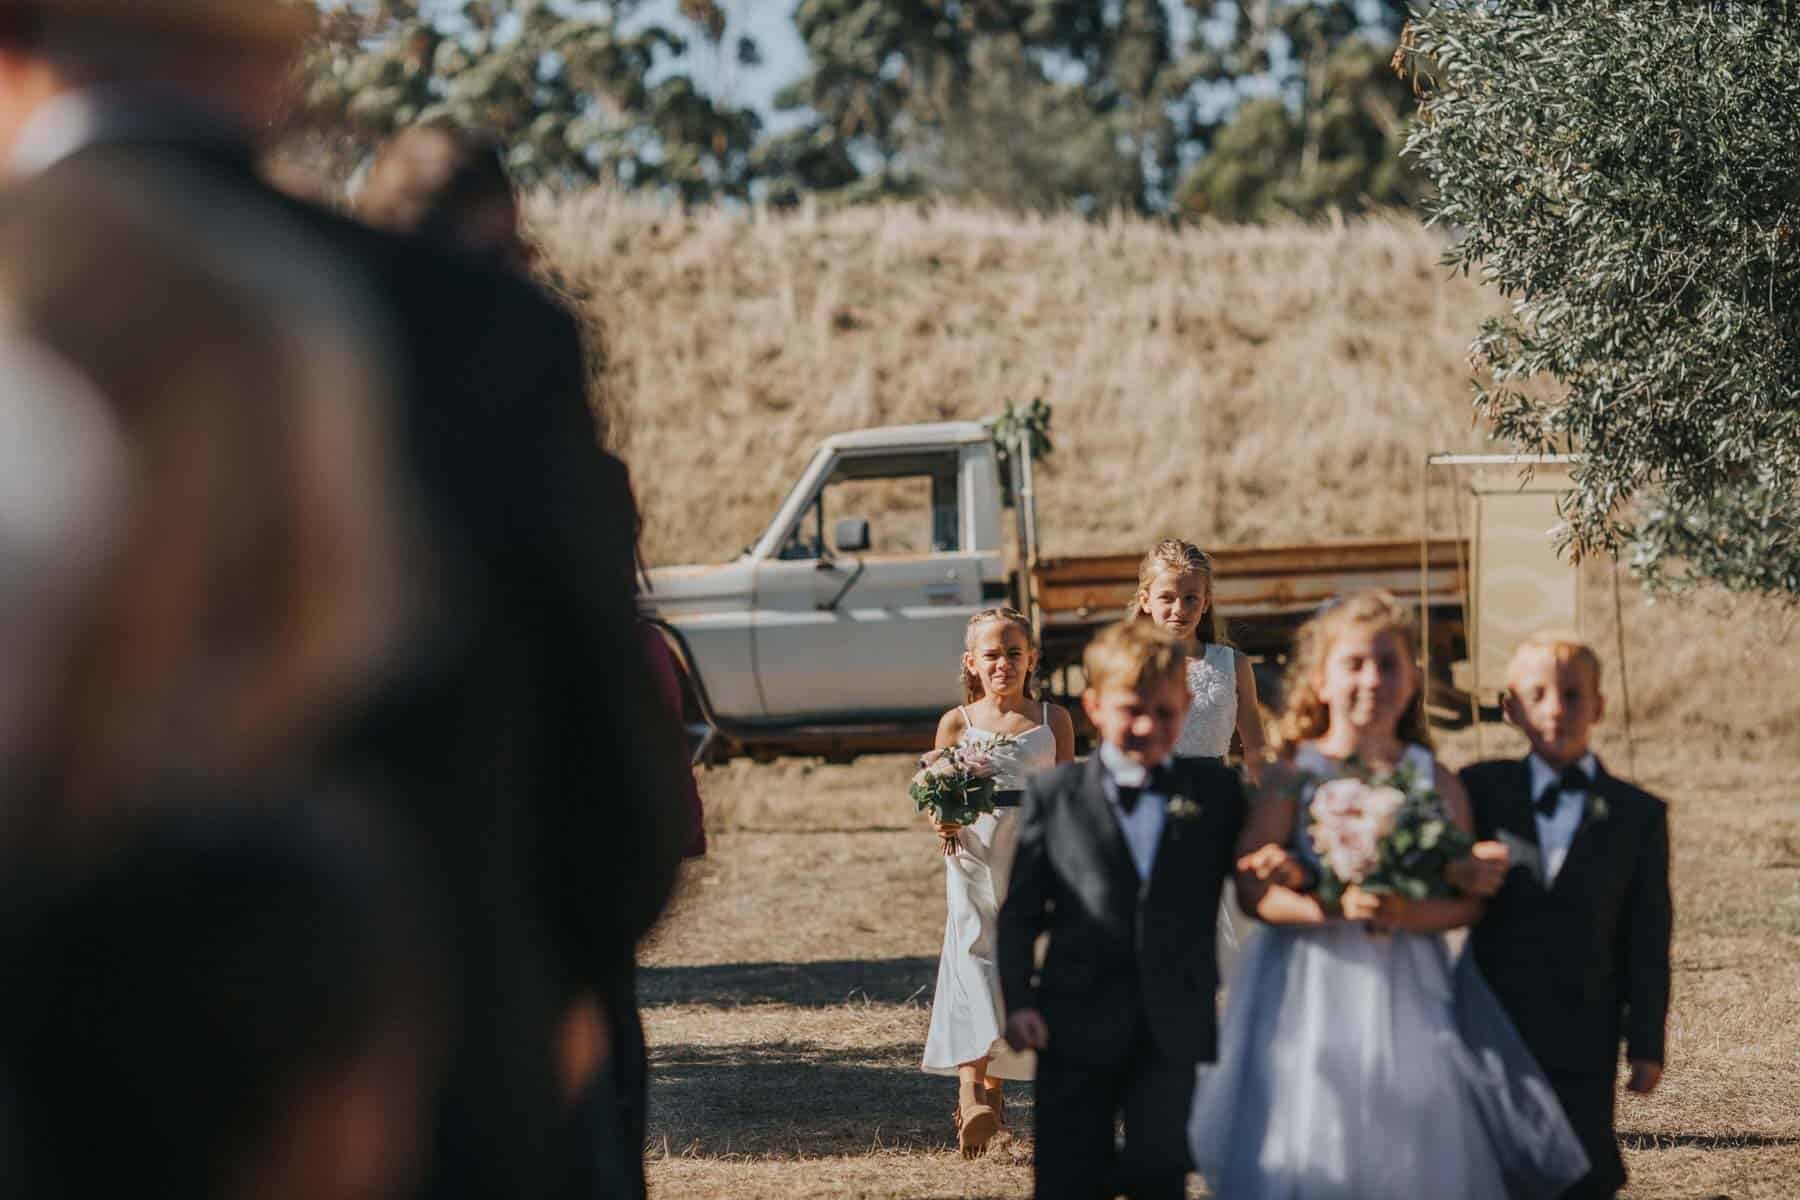 flower girls and page boys on an old ute - Australian wedding